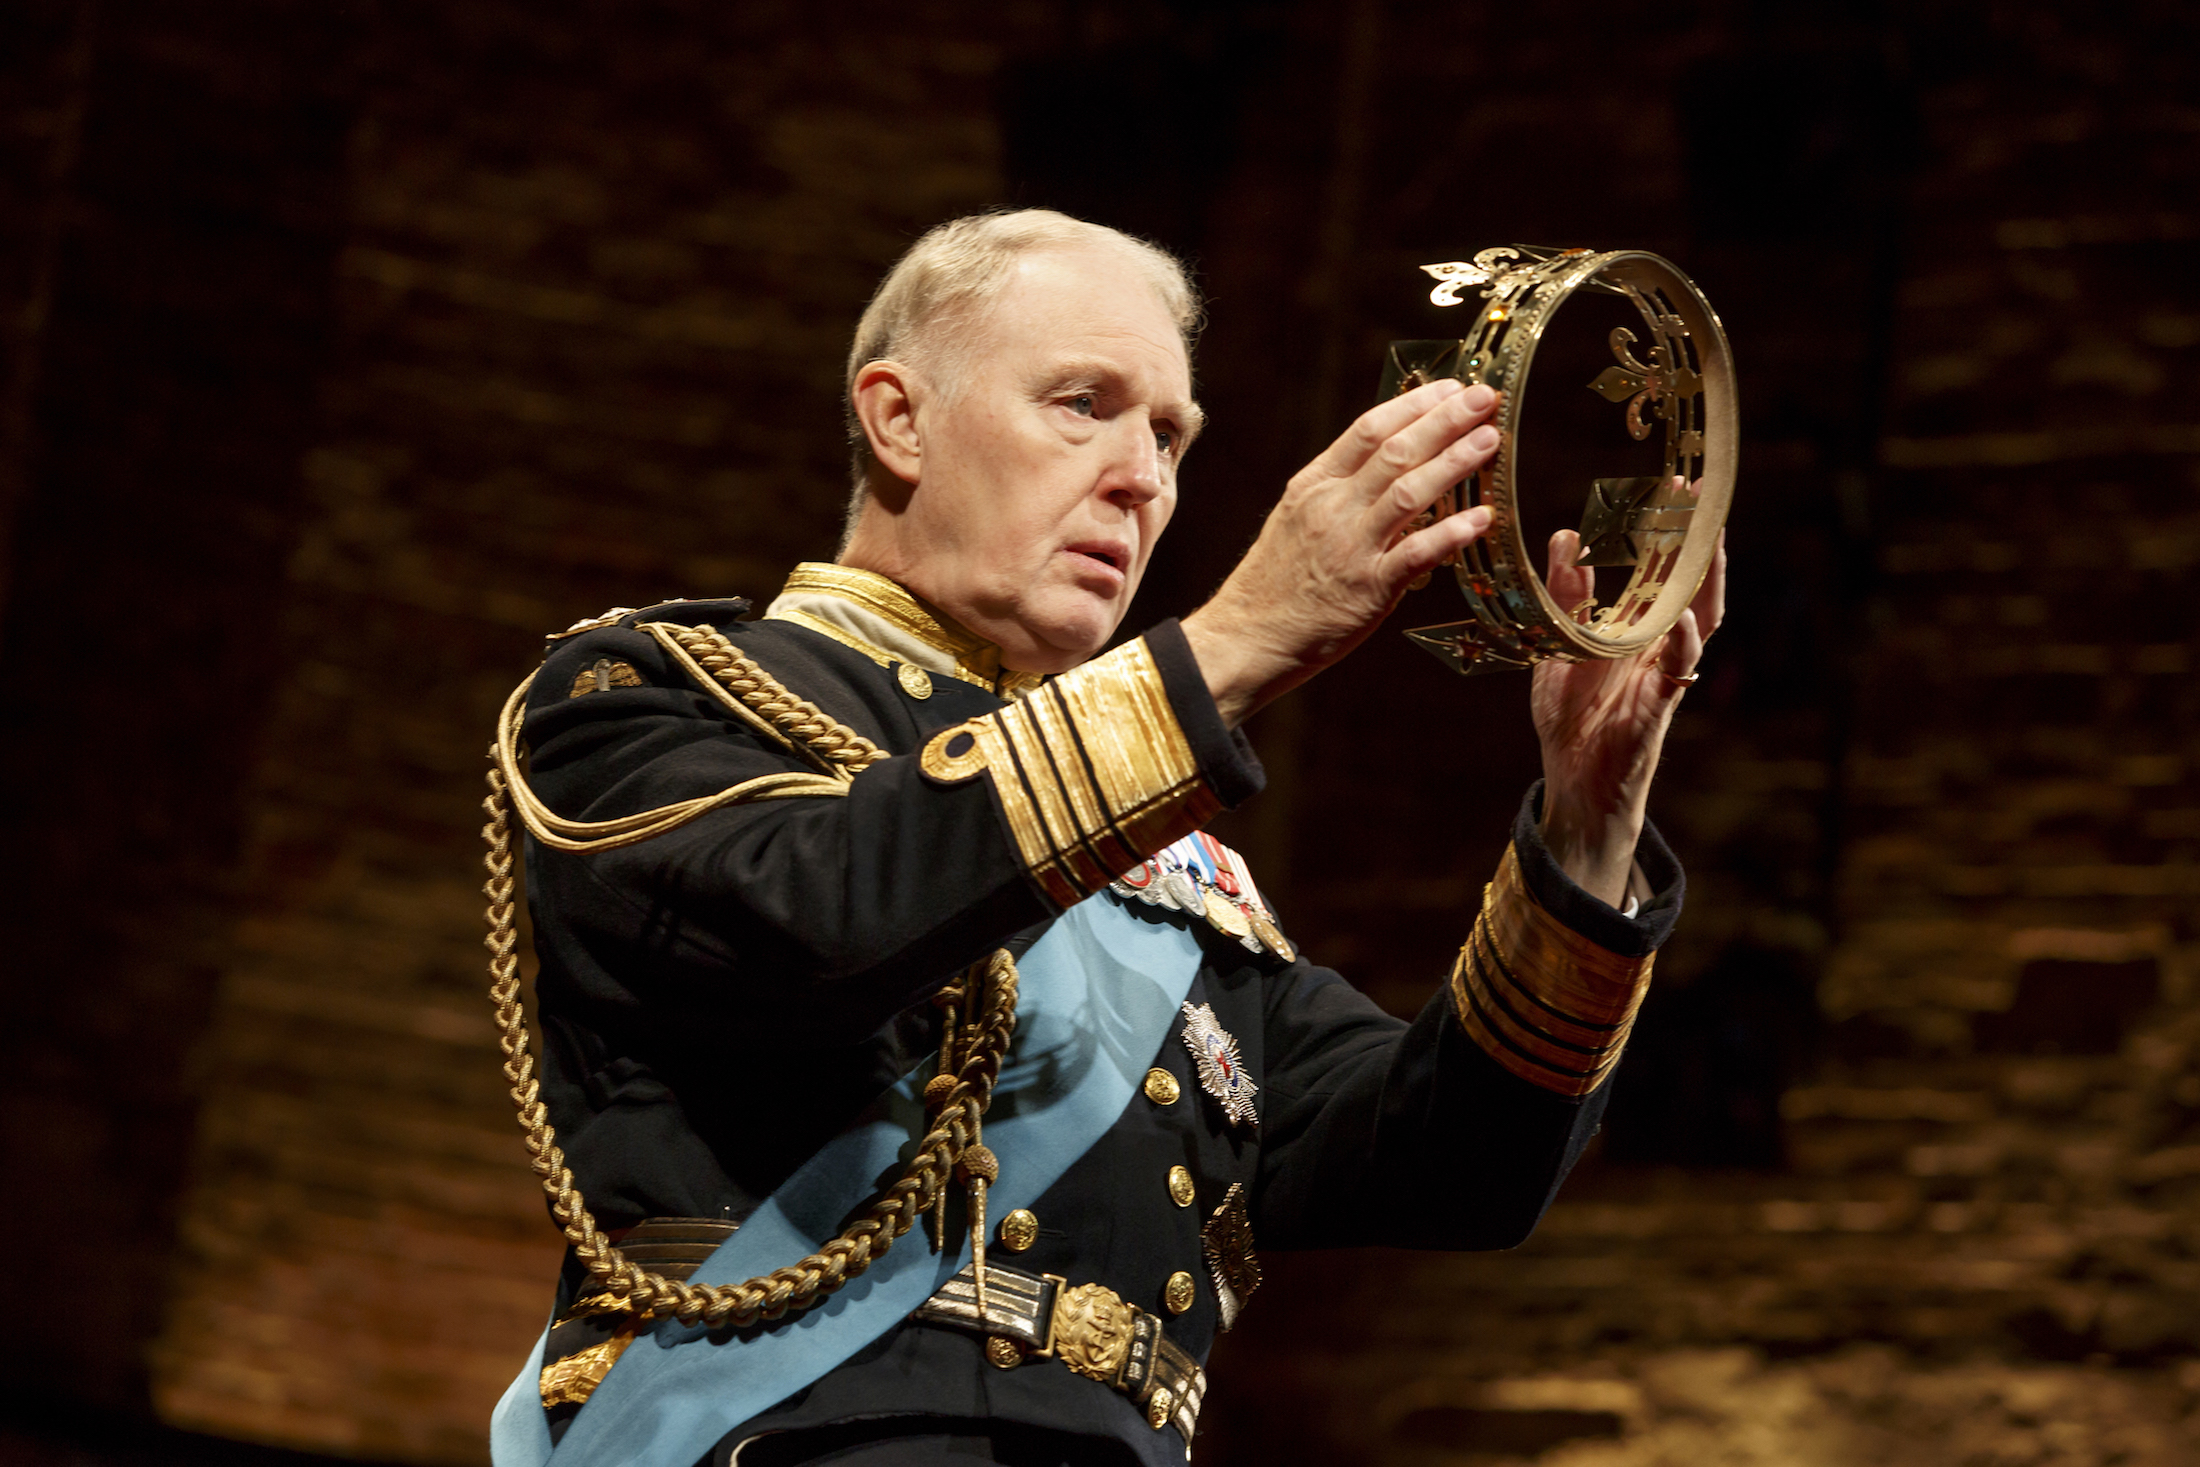 King Charles III\nMusic Box Theatre\n\nProduction Credits:\nRupert Goold (director)\nTom Scutt (design)\nJon Clark (lighting)\nPaul Arditti (sound)\n\nOther Credits:\nWritten by: Mike Bartlett - See more at: http://www.playbill.com/events/event_detail/king-charles-iii-at-music-box-theatre-346670#sthash.t55FWIA1.dpuf